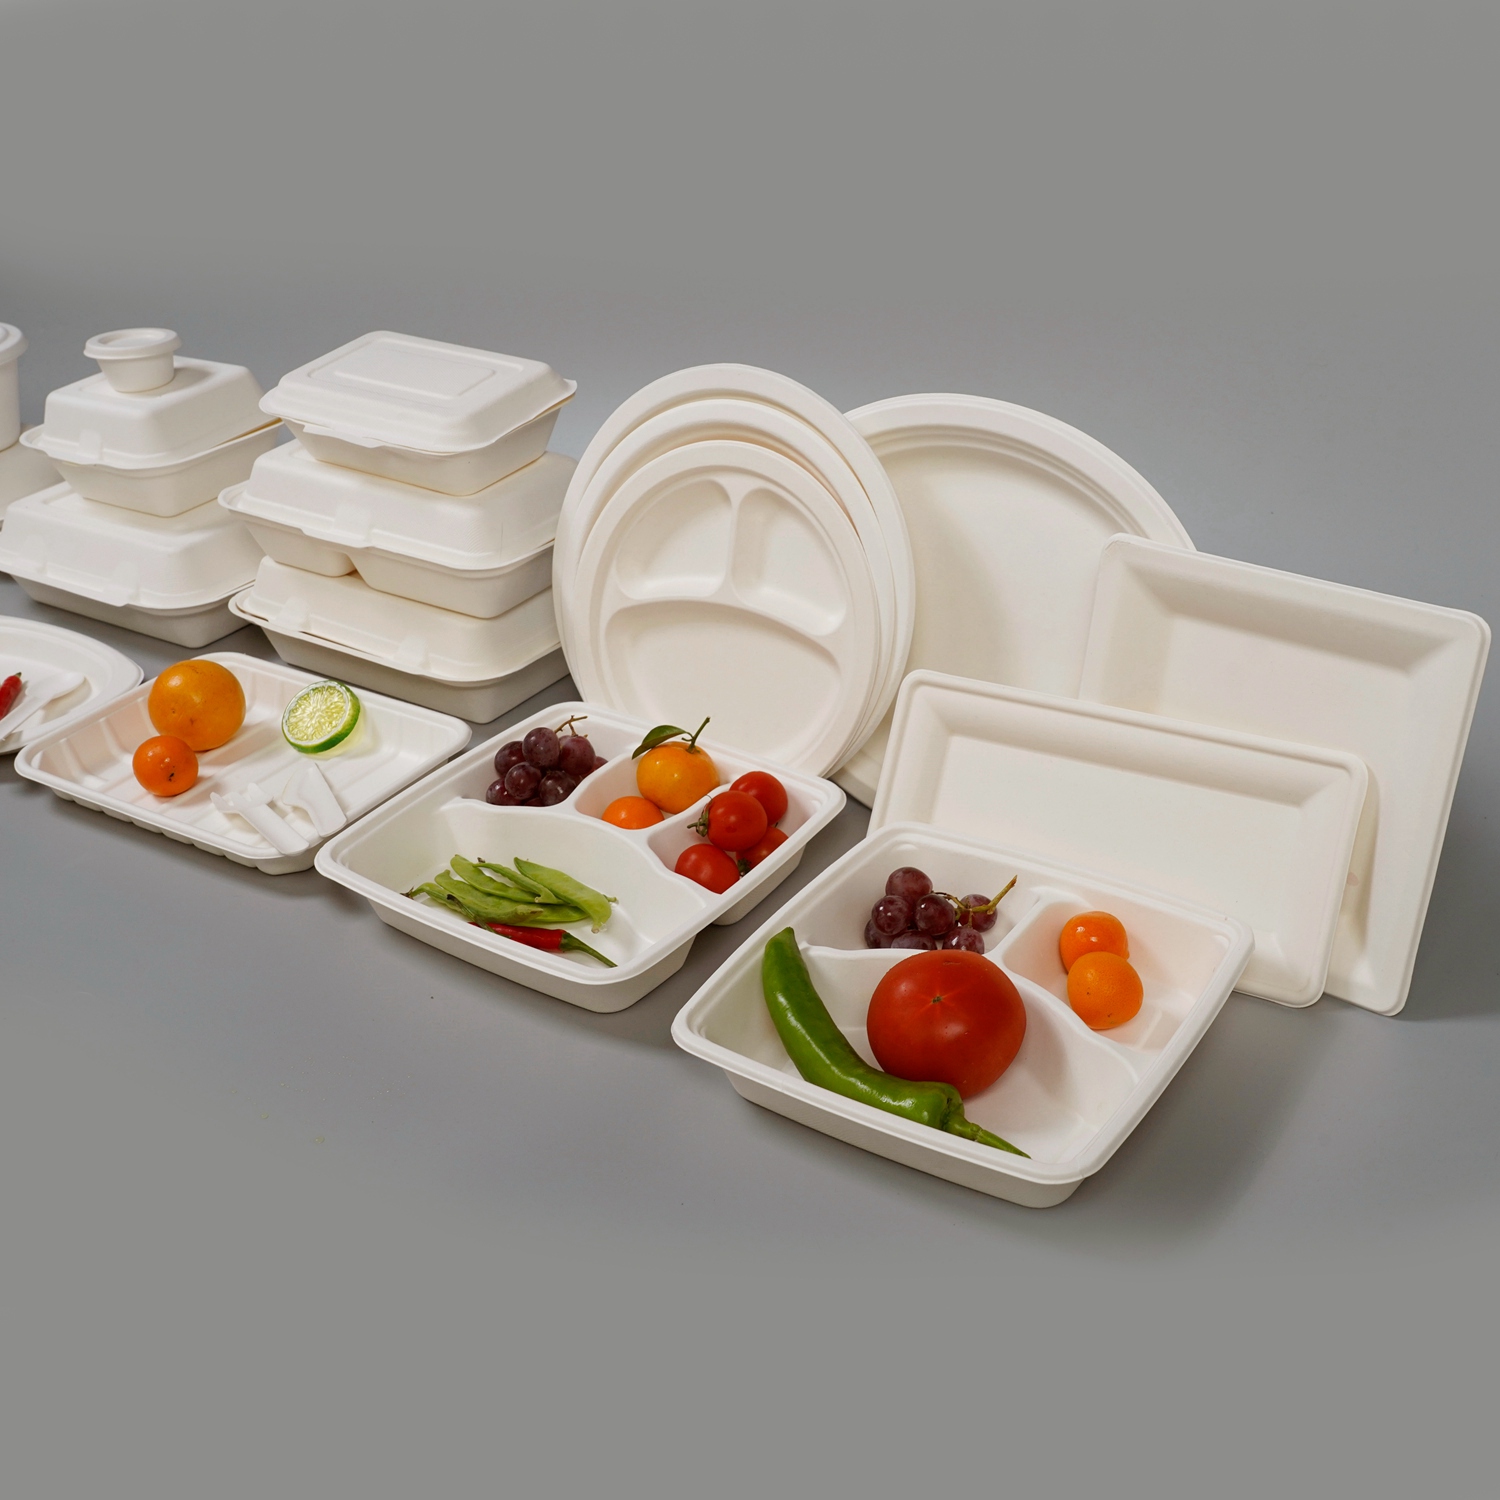 Tableware products